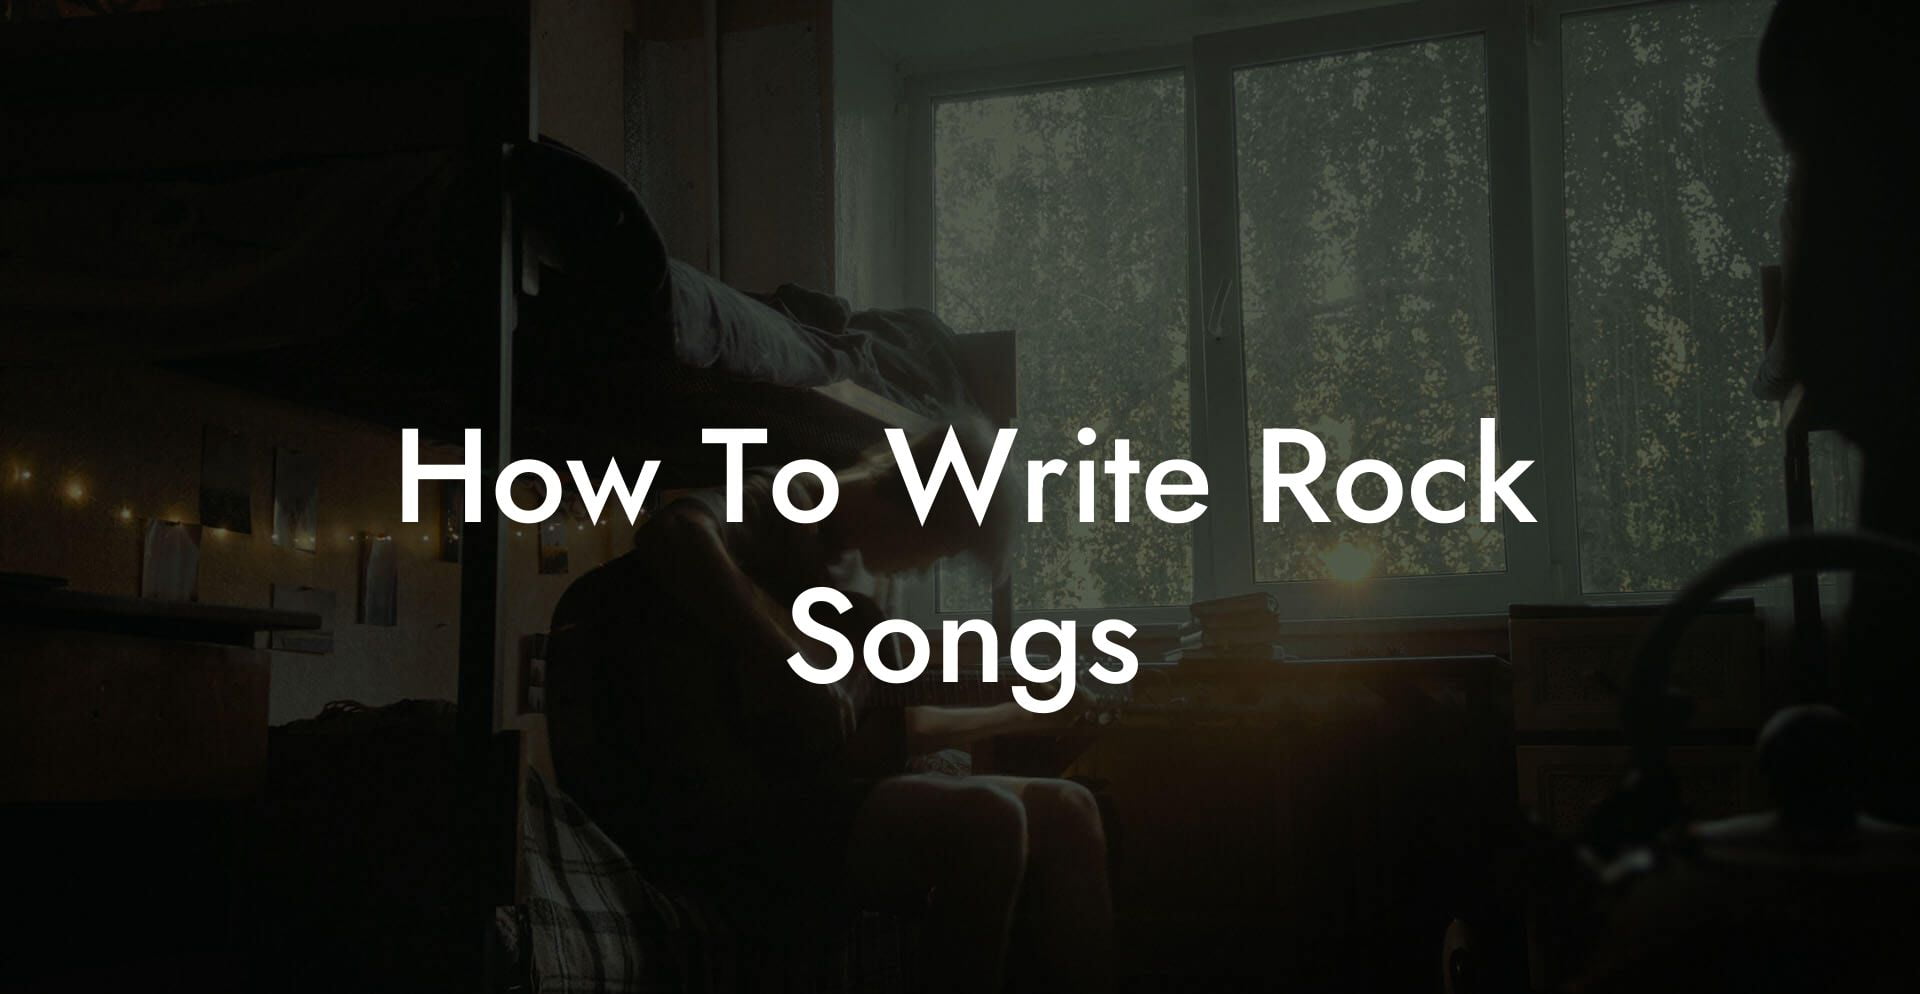 how to write rock songs lyric assistant